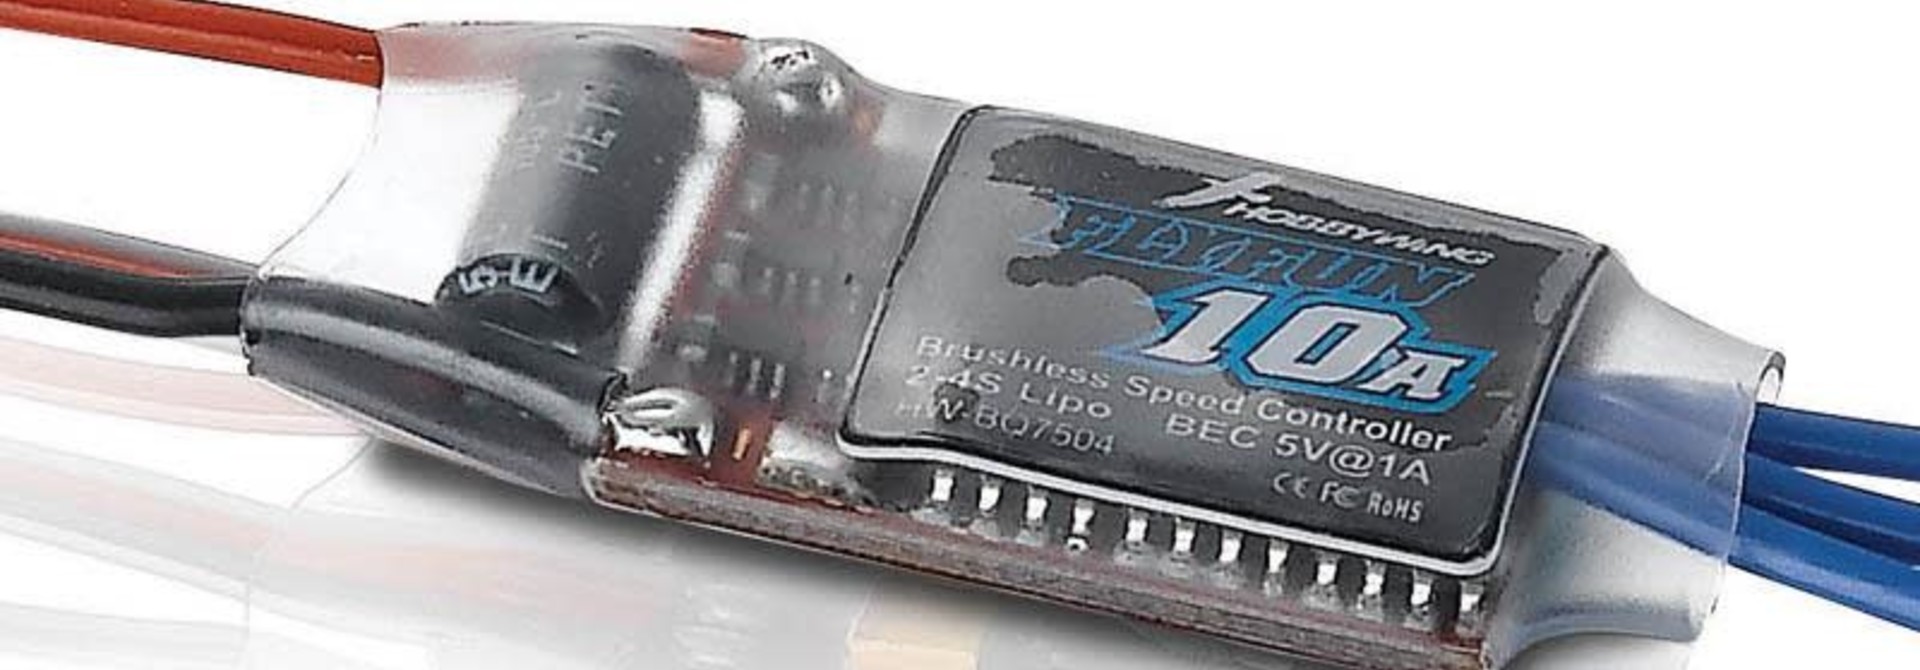 Hobbywing FlyFun 10A ESC for 300g and Plane 2-4s